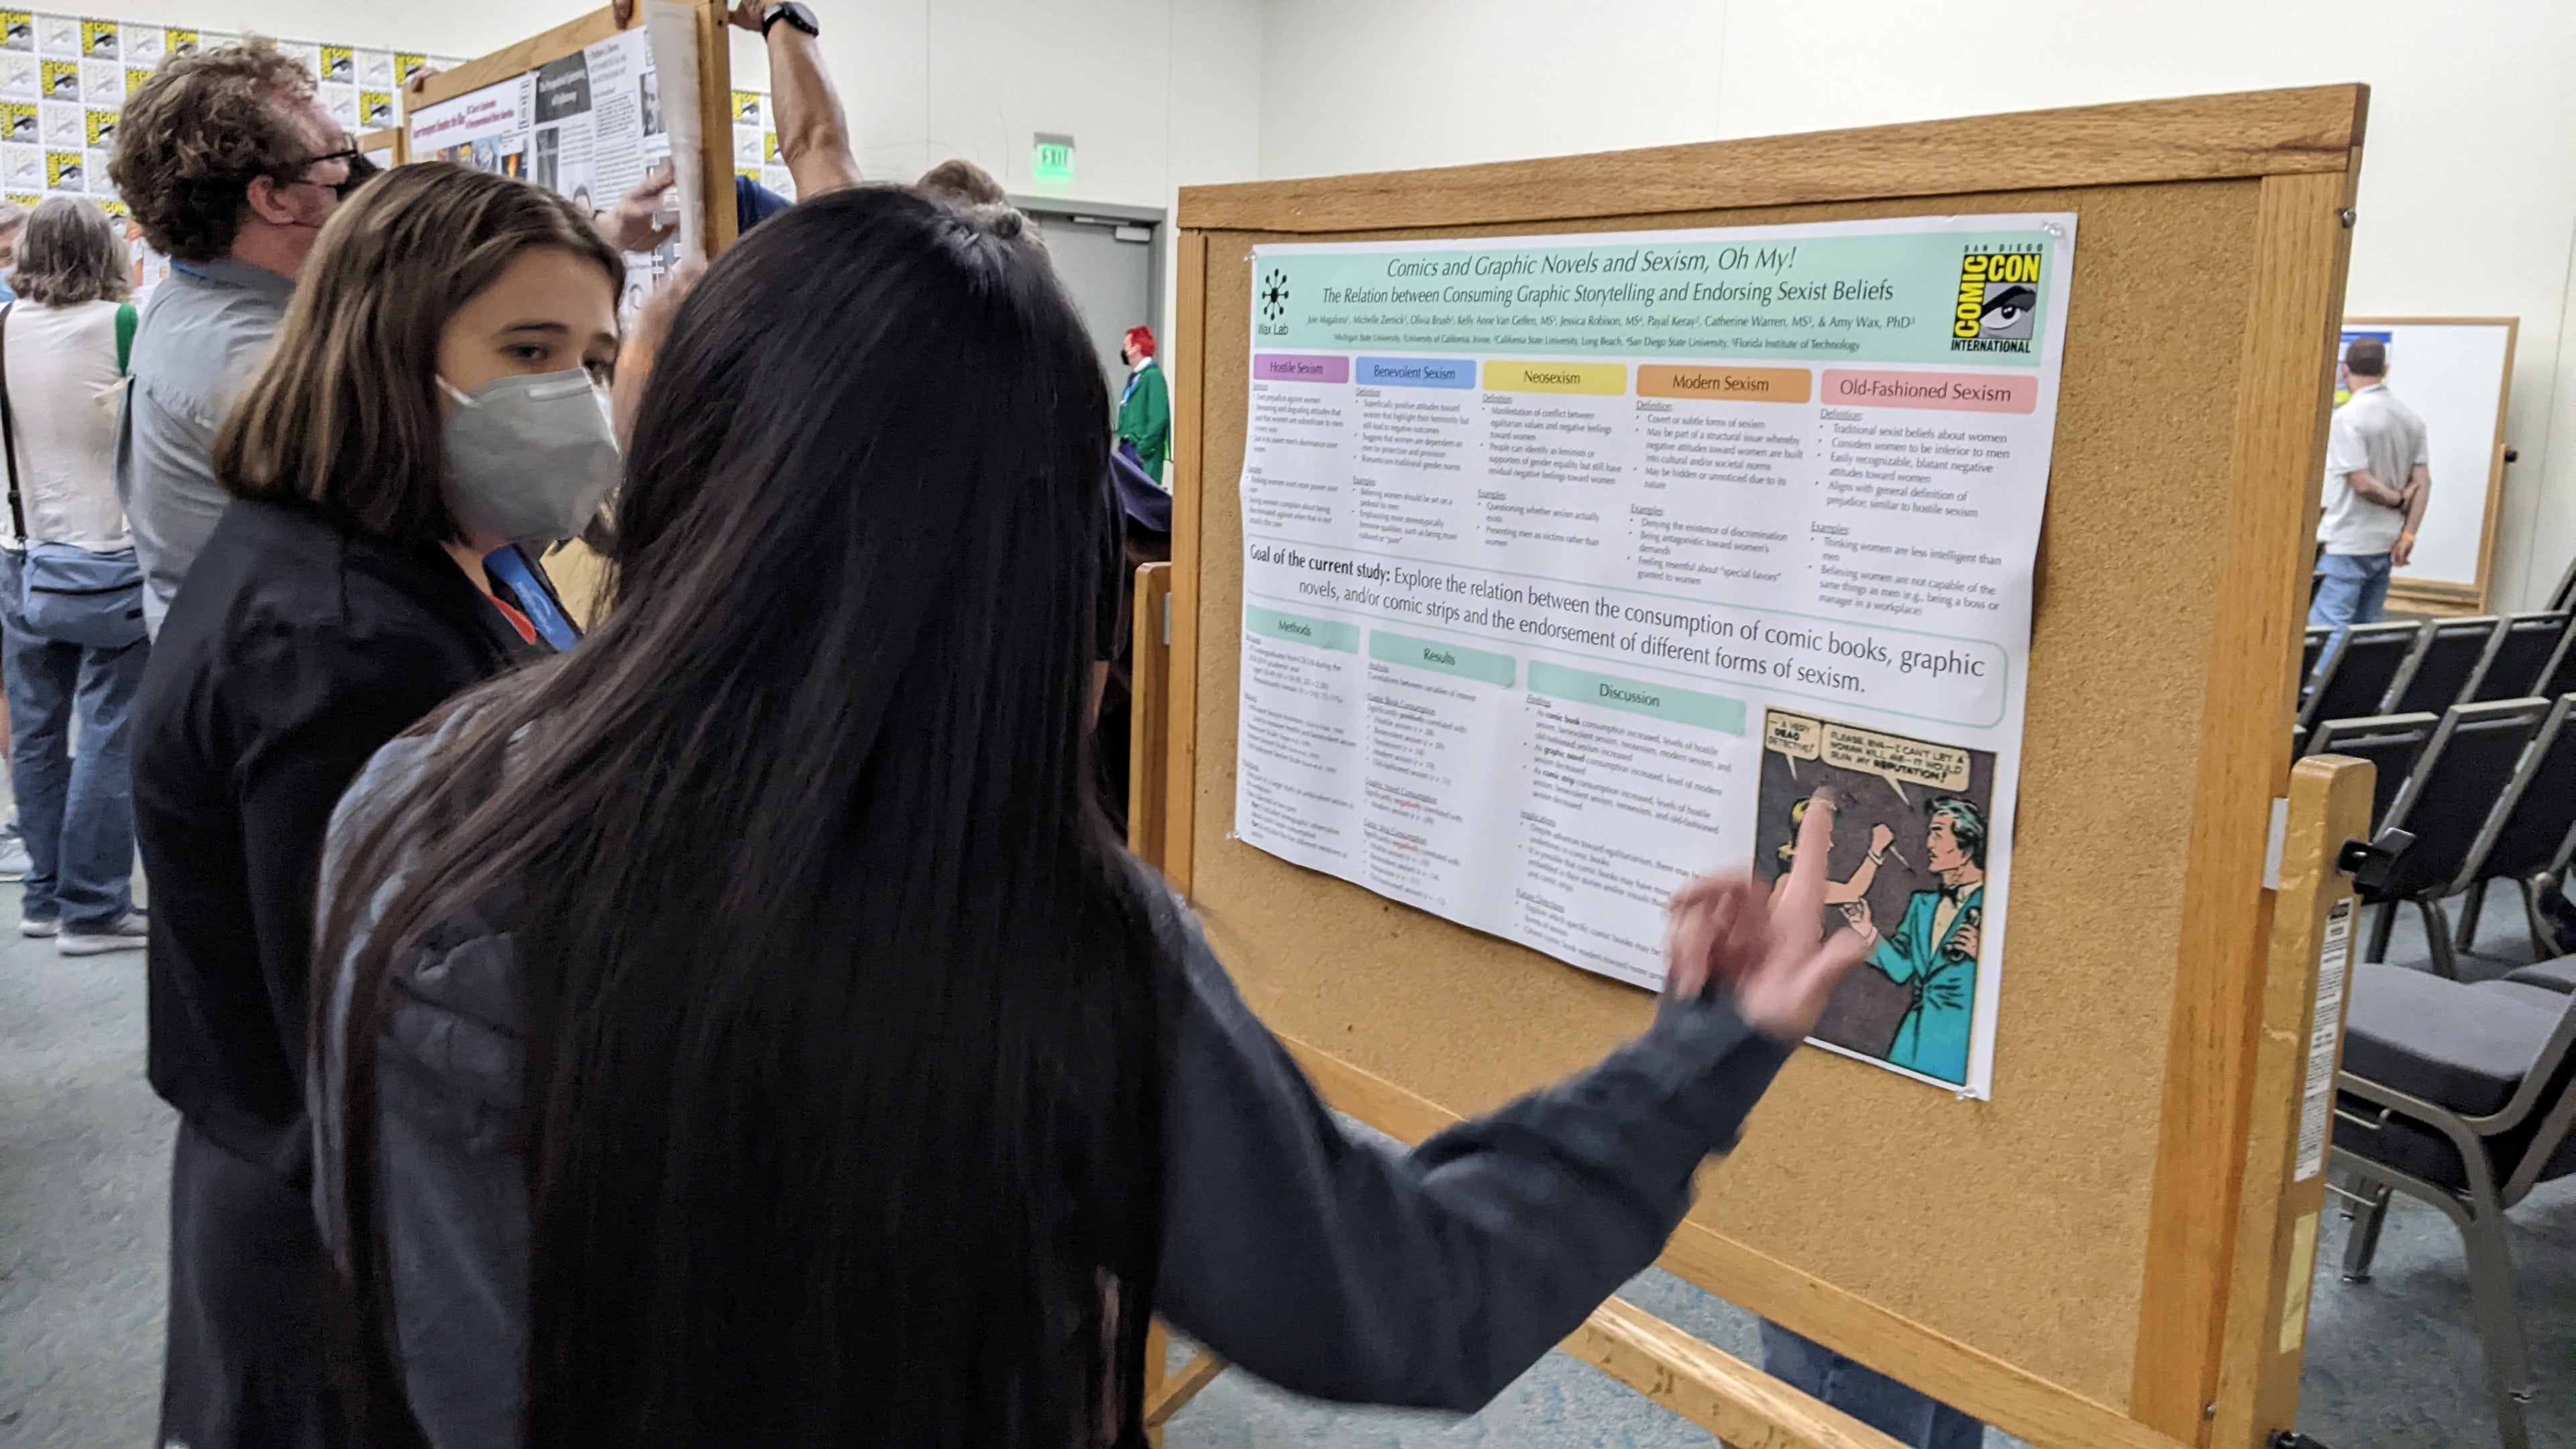 Two people standing in front of an academic poster discussing it